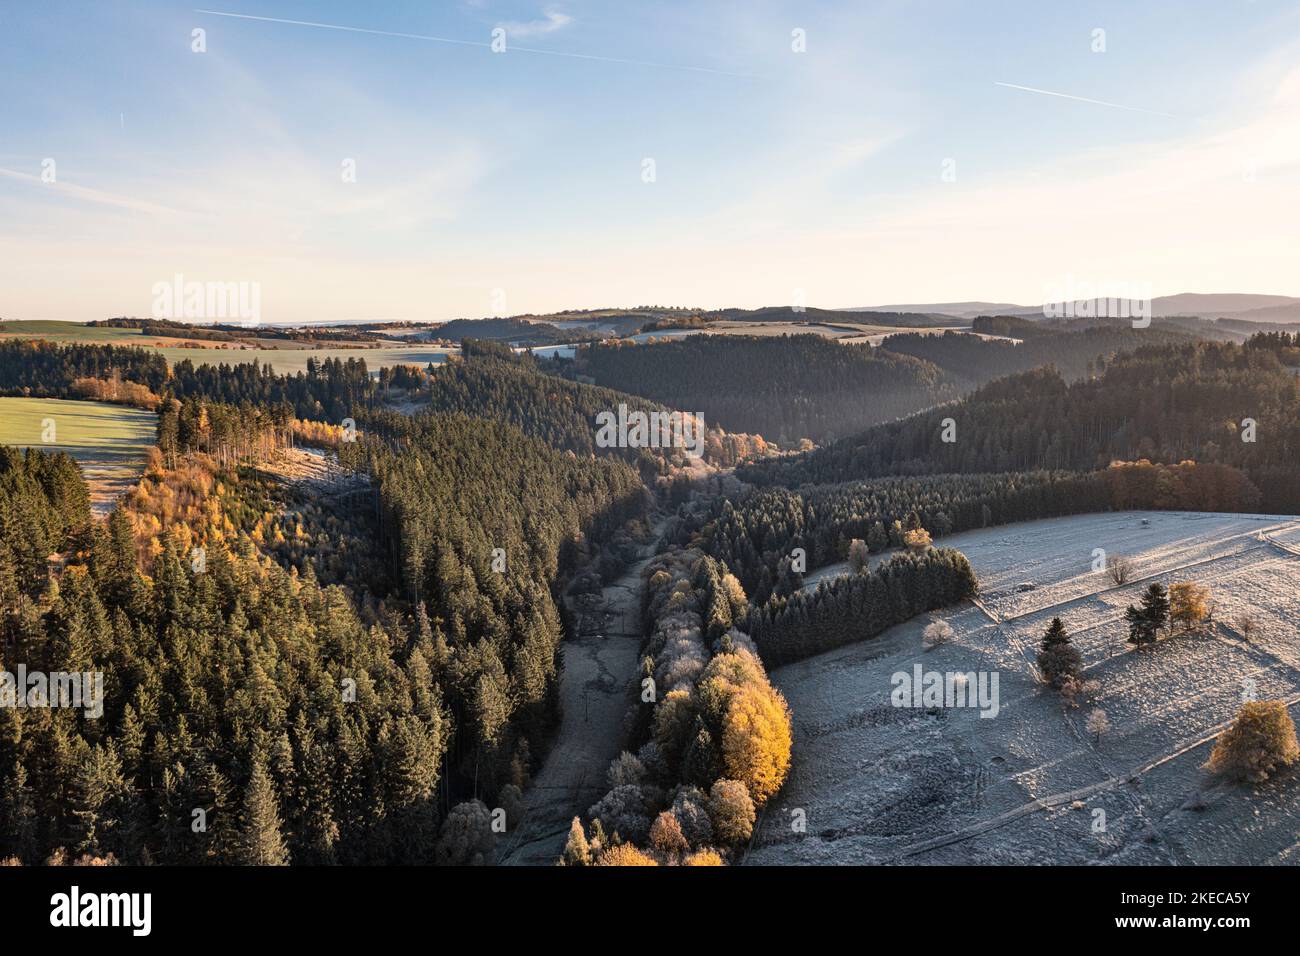 Germany, Thuringia, Großbreitenbach, Friedersdorf, valley, forest, fields, woods, mountains, aerial photo, morning light Stock Photo